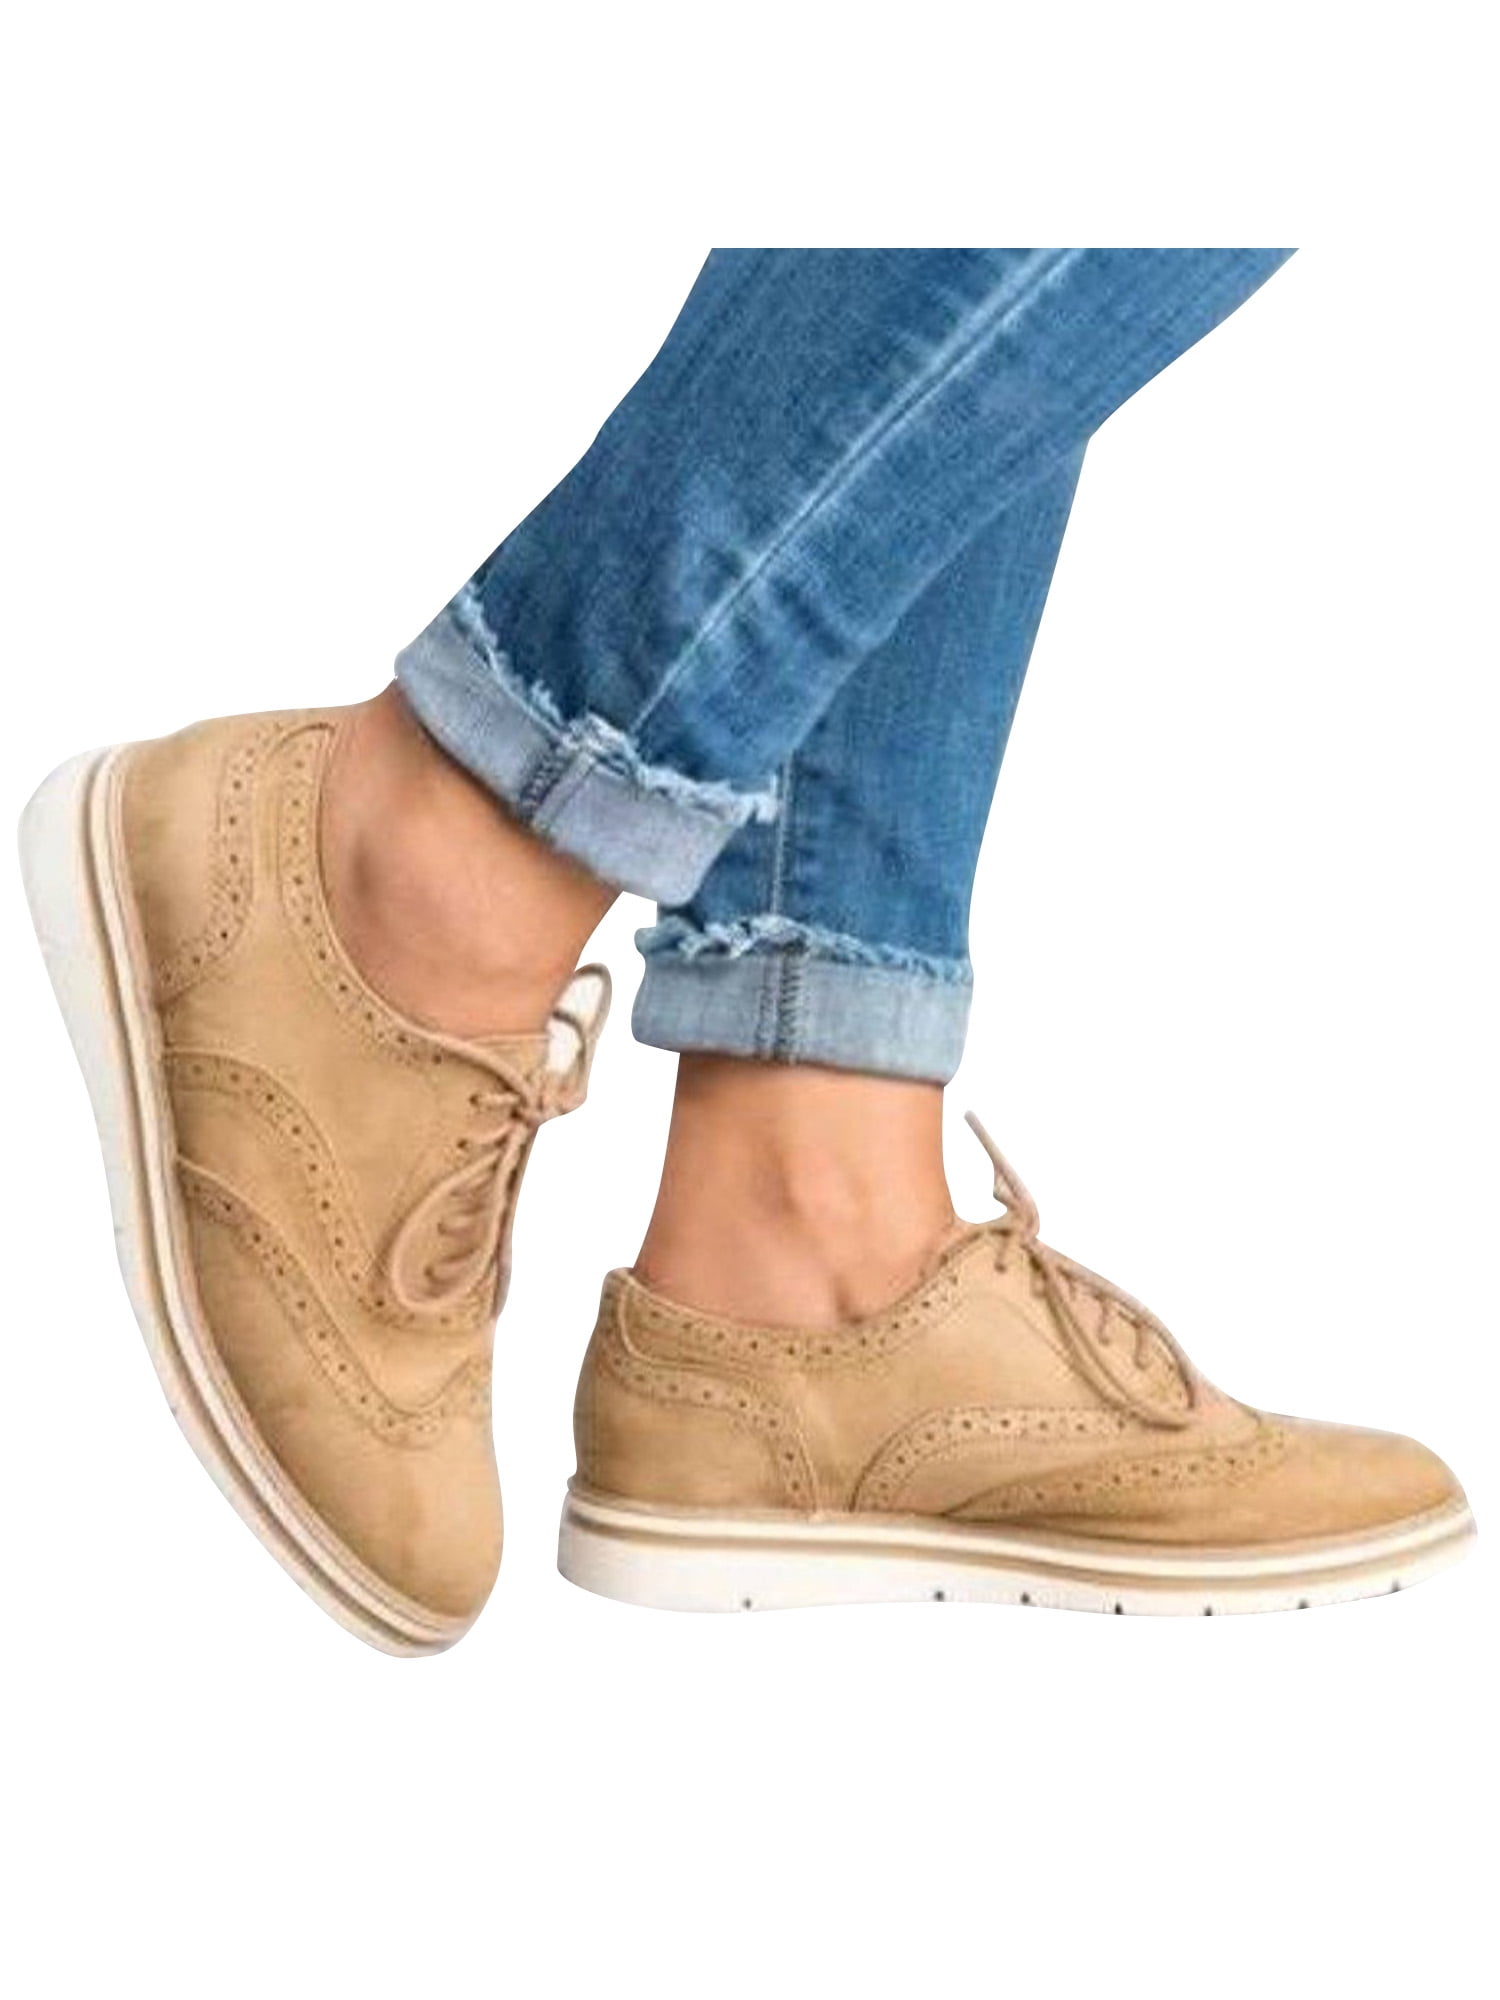 Womens Fashion Sneakers Trainers Shoes Ladies Flexi Sole Casual Zip Pumps Size 